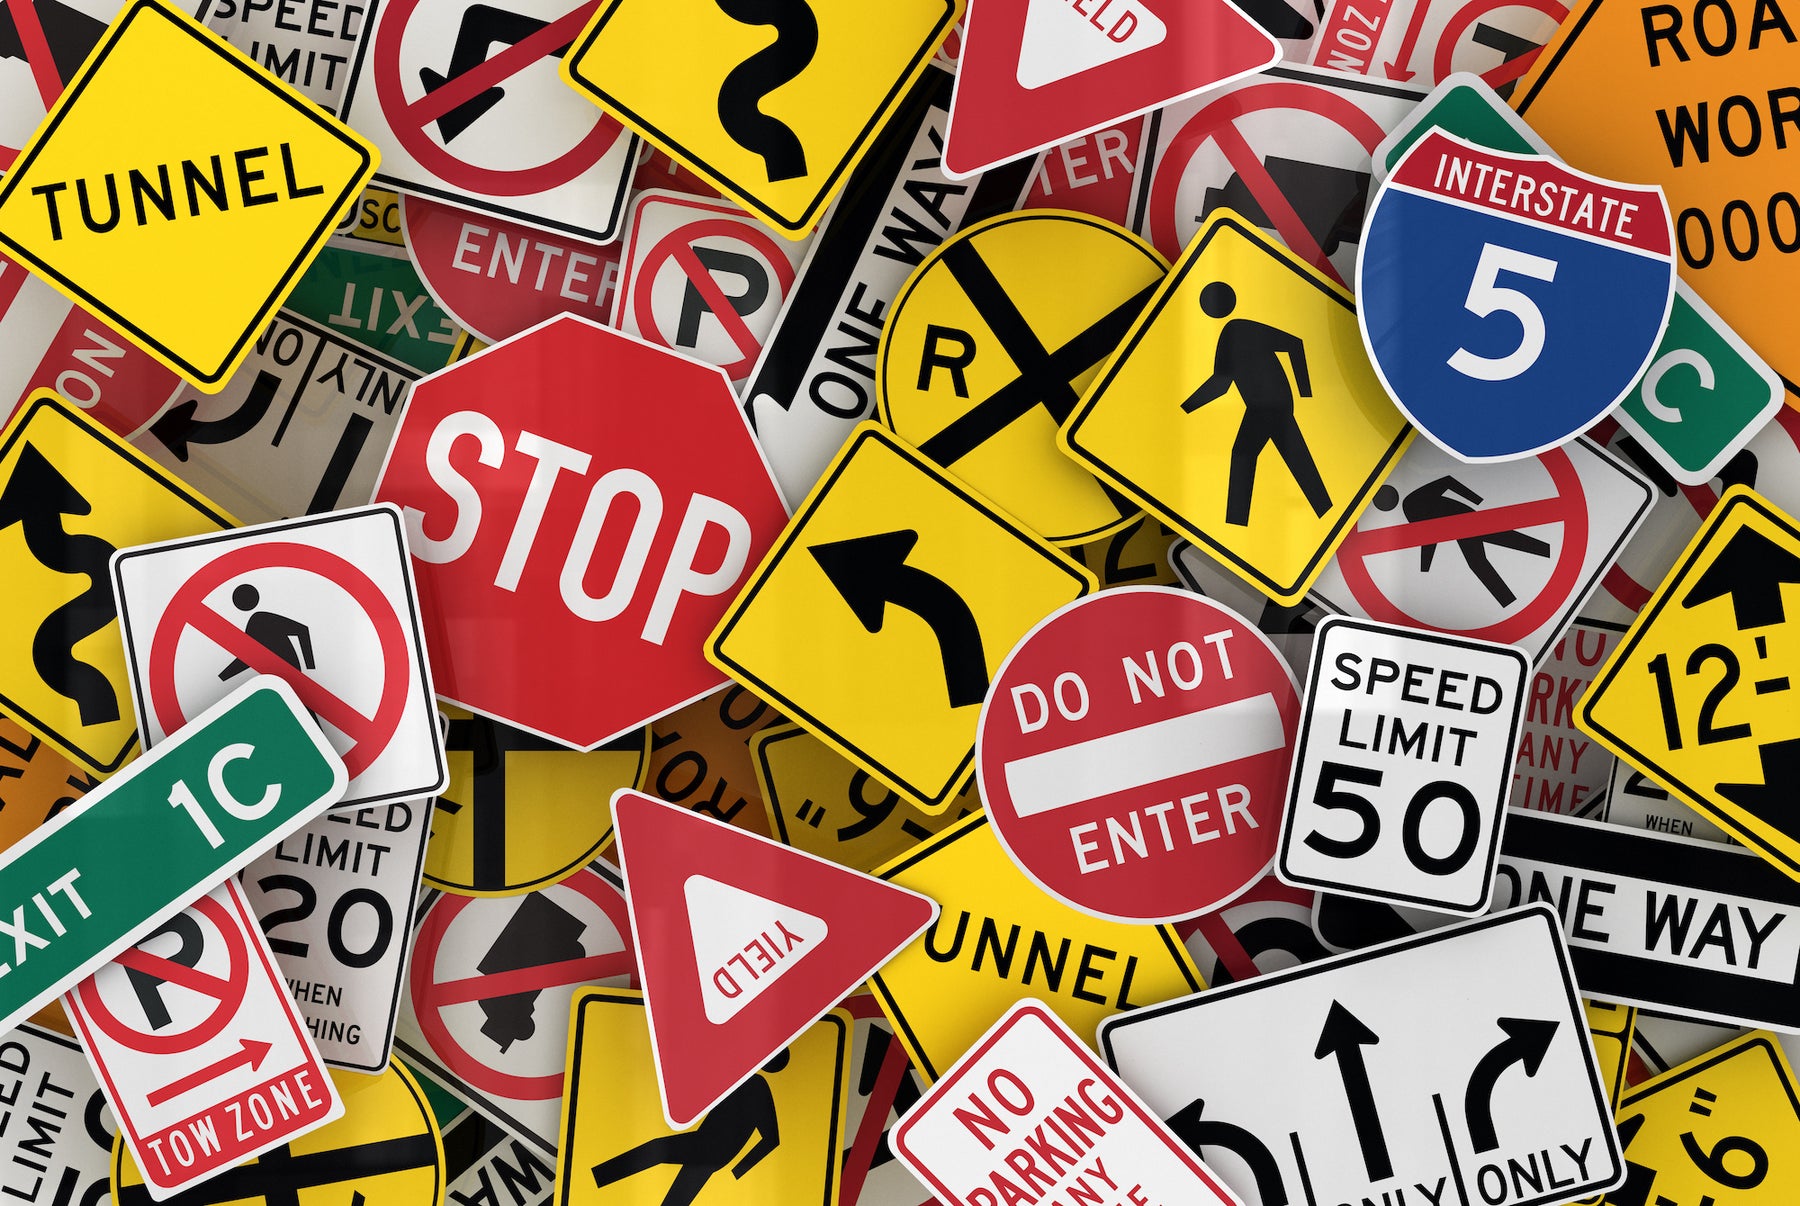 Your Ultimate Guide to the Best Road Signage, No Parking Signs, Barricades, and More